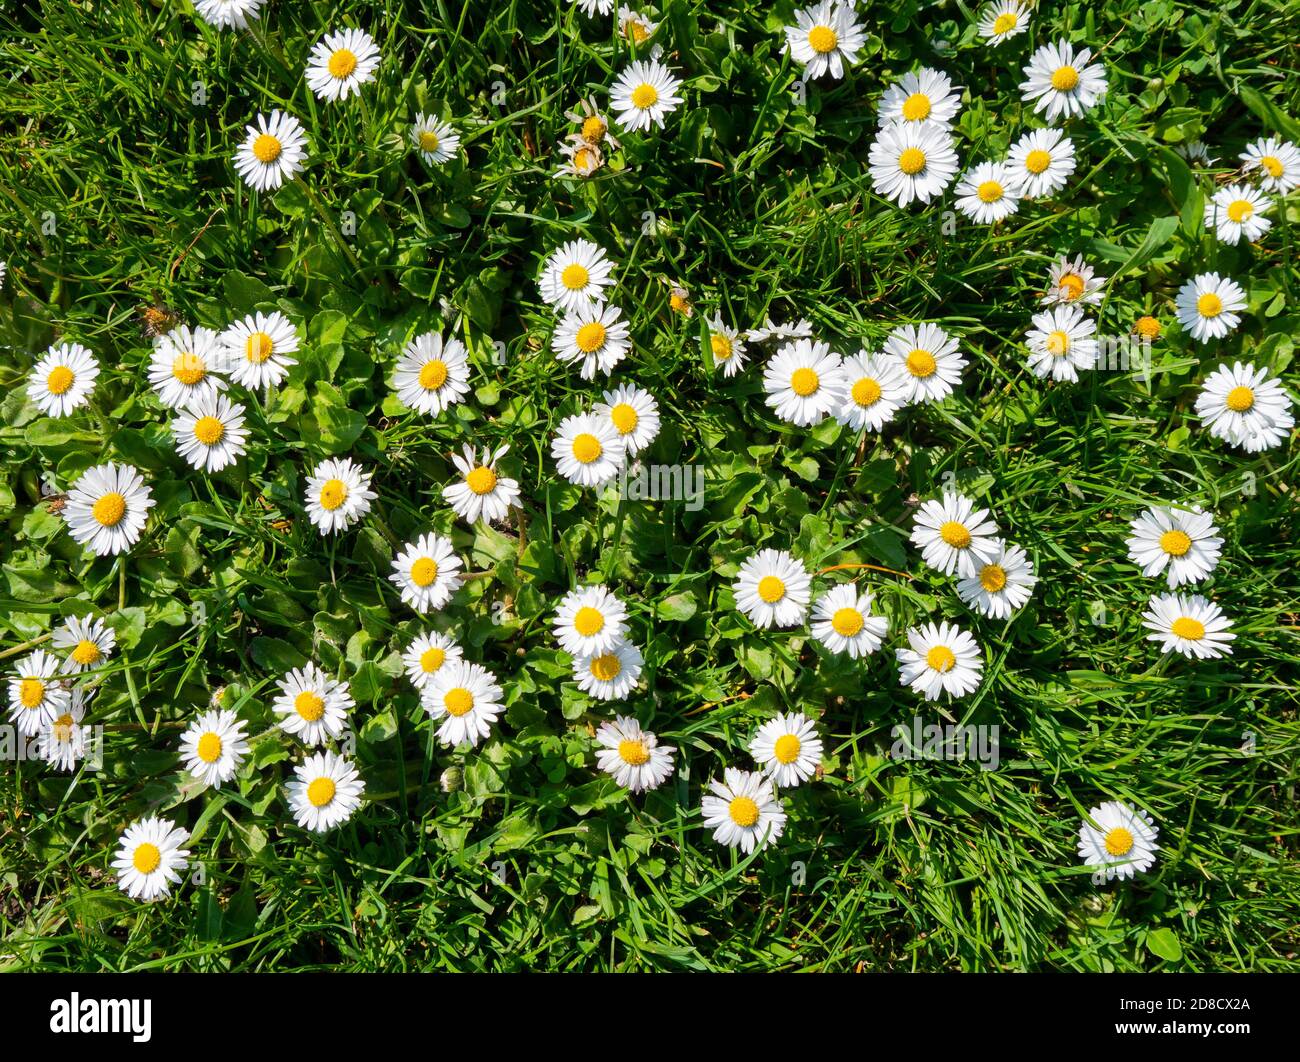 A close up of wild Daisy flowers on green grass Stock Photo